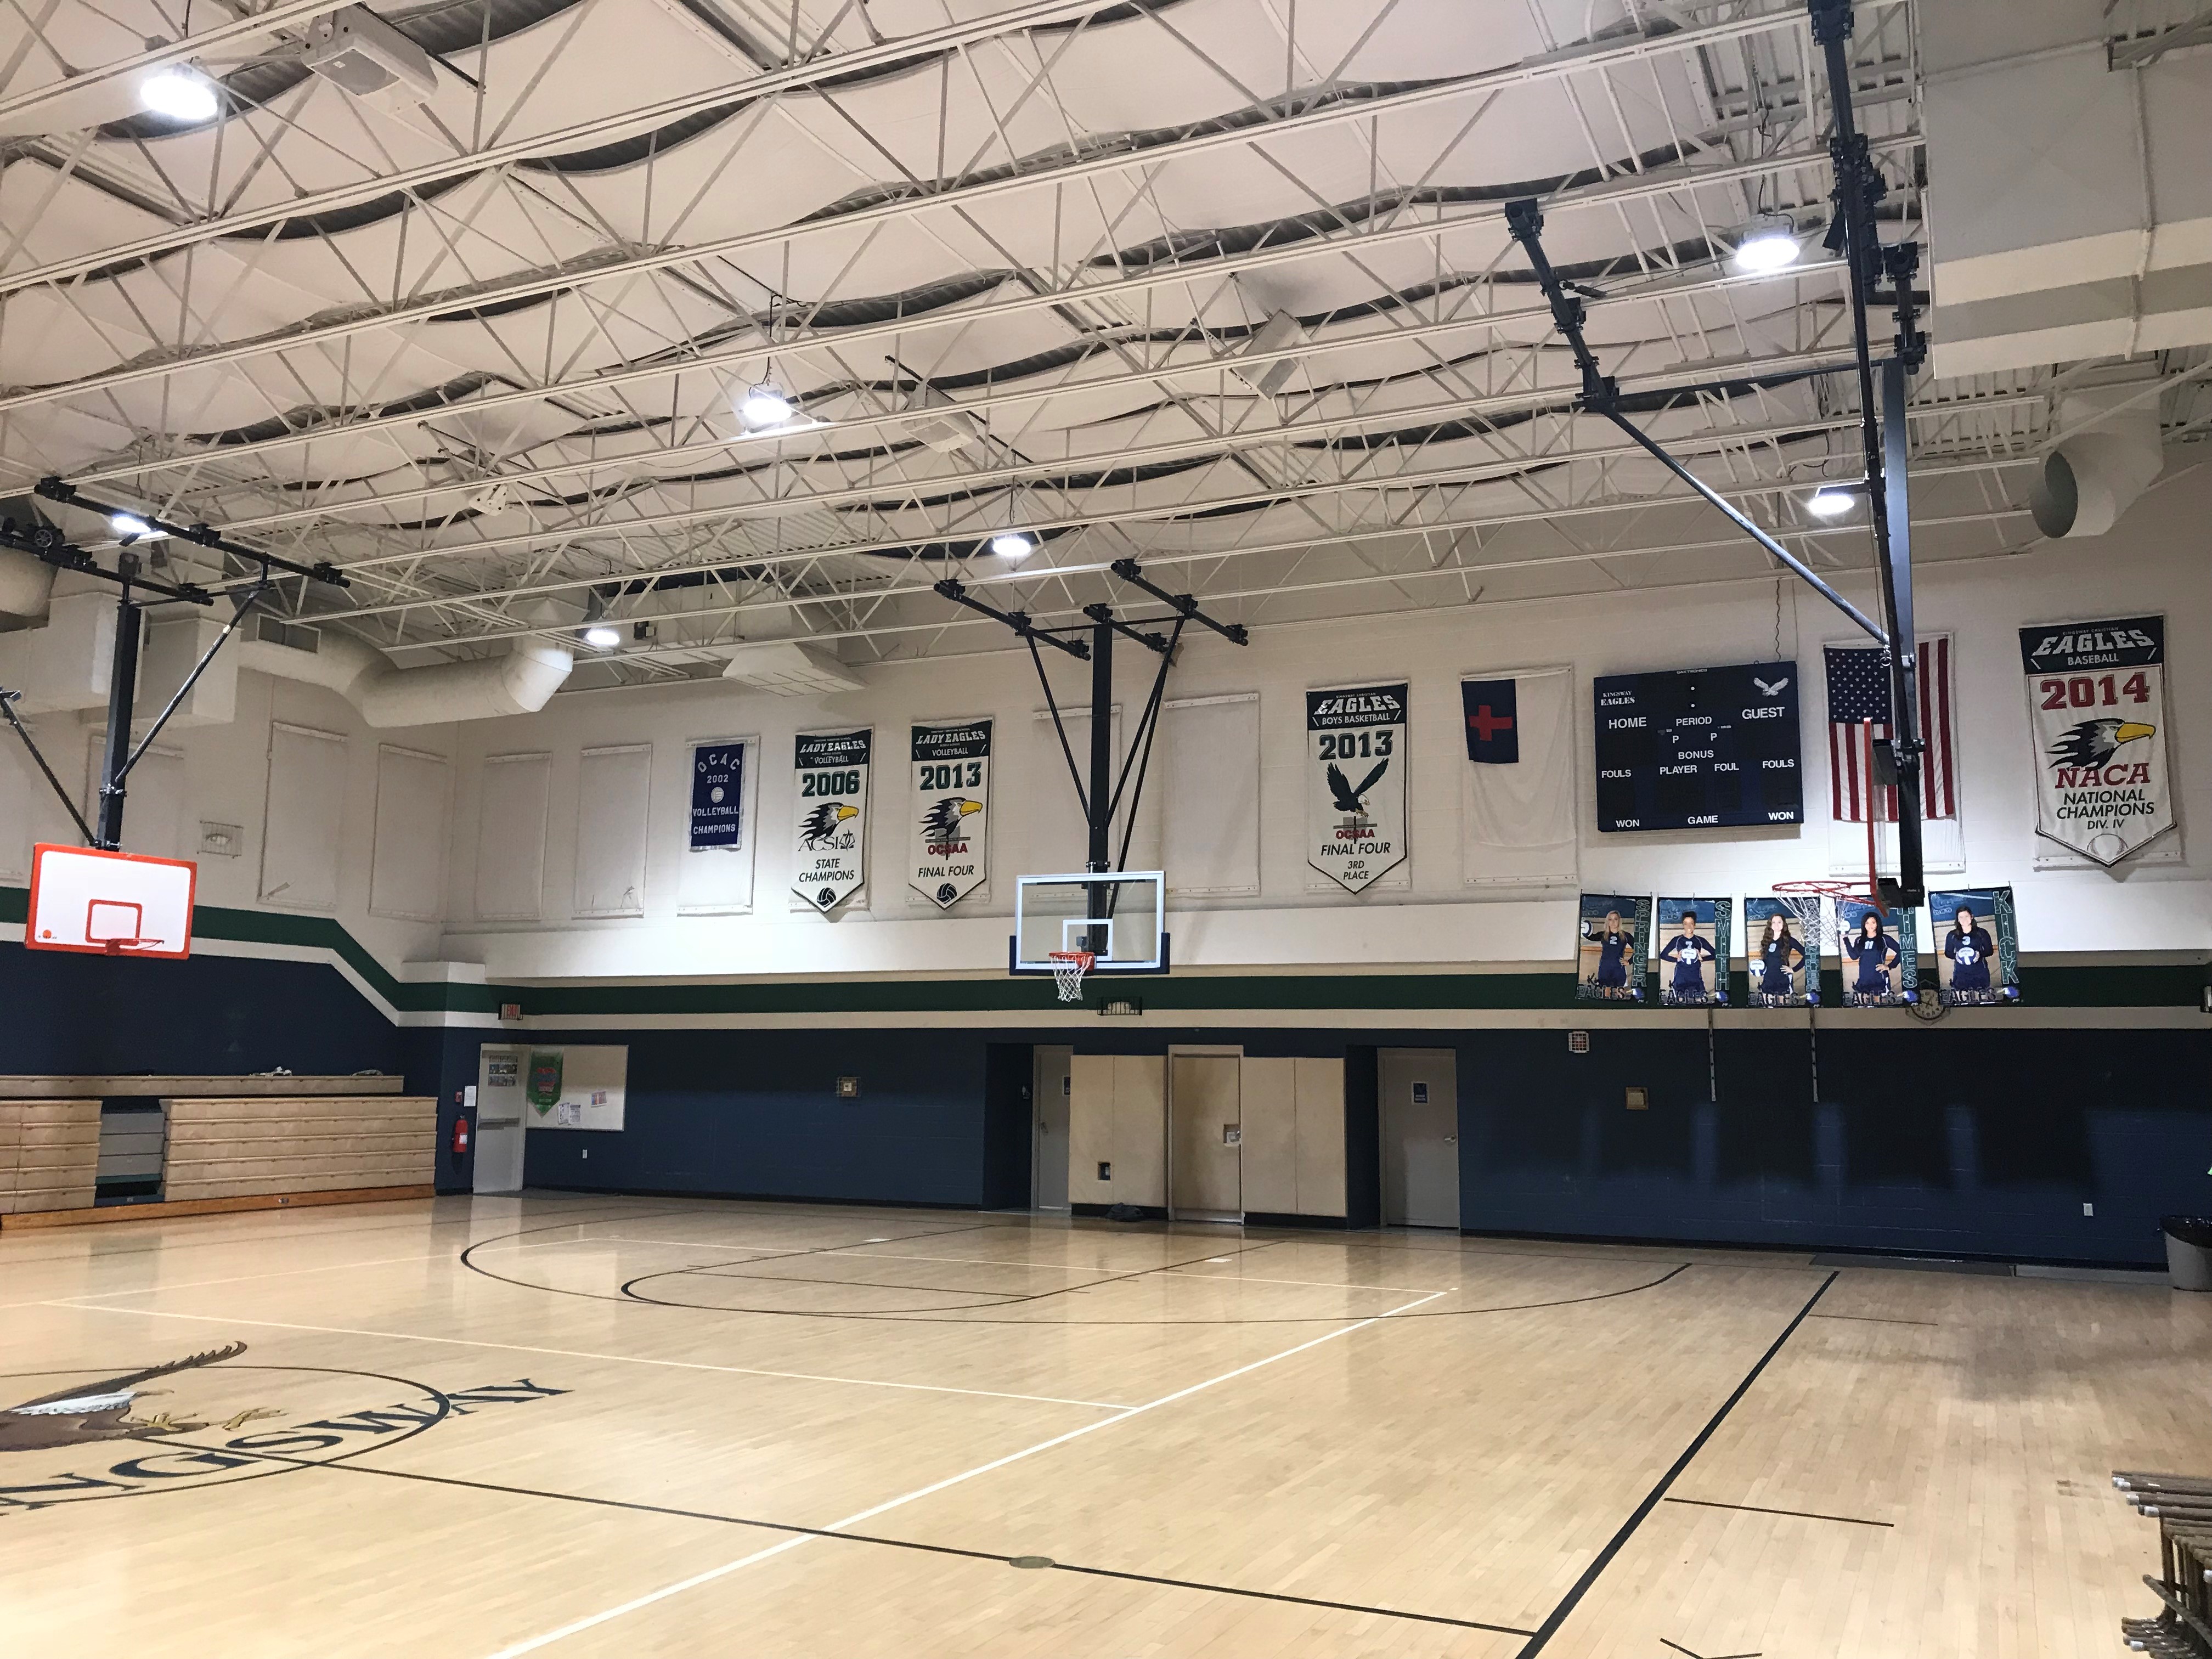 Kingsway Christian School Becomes 60% More Efficient with new LED Lighting Upgrade